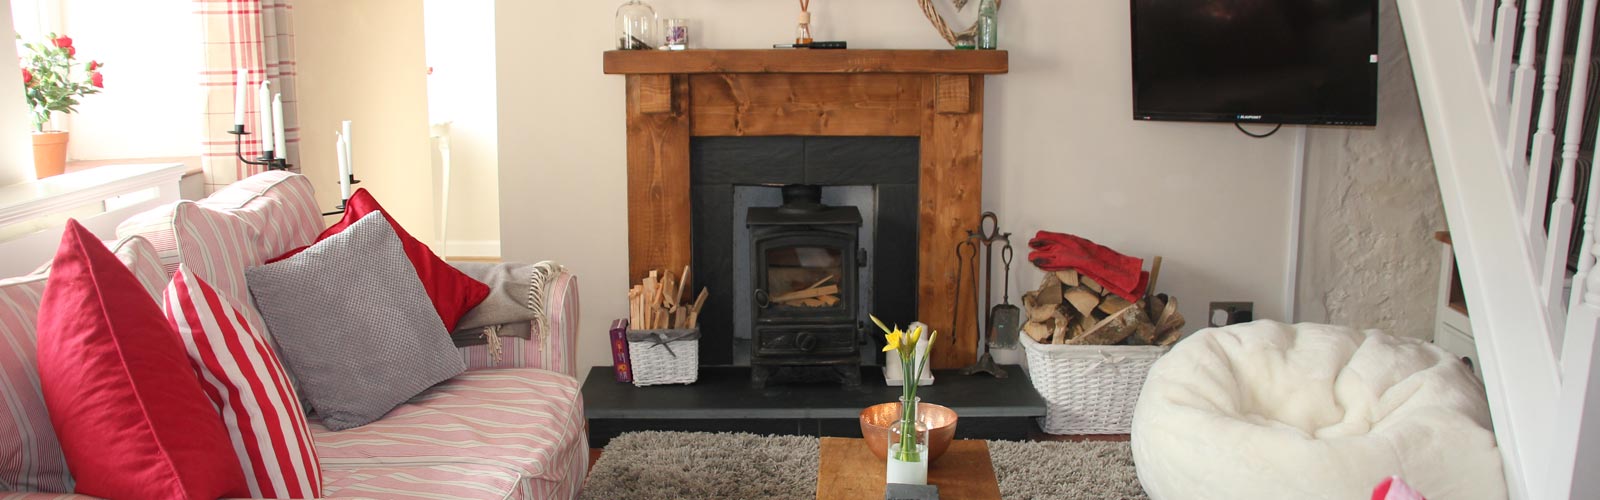 Cosy living room with woodburner